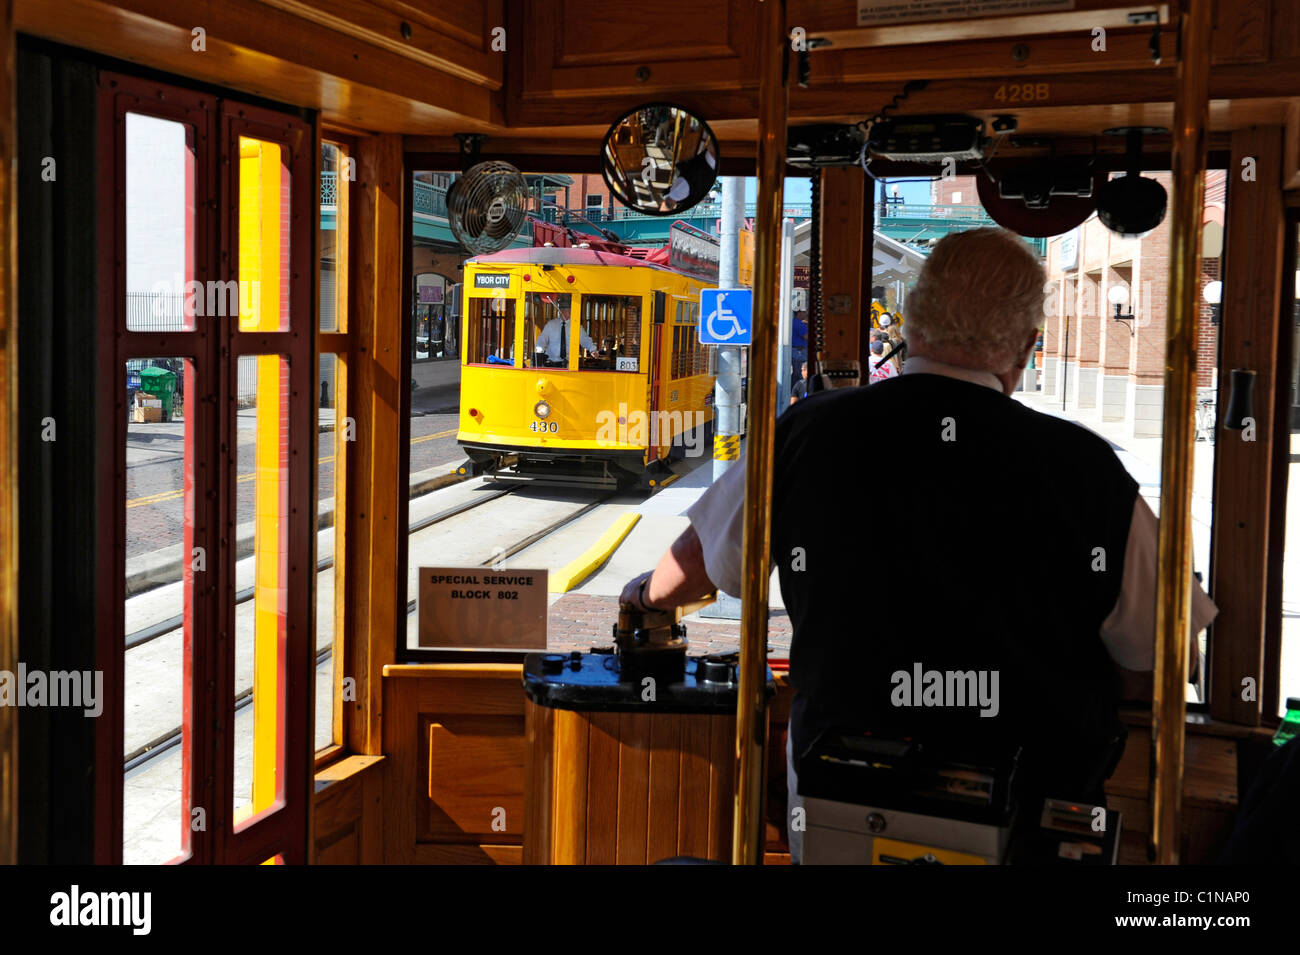 Conductor runs yellow historic trolley on track in Ybor City Tampa Florida Stock Photo